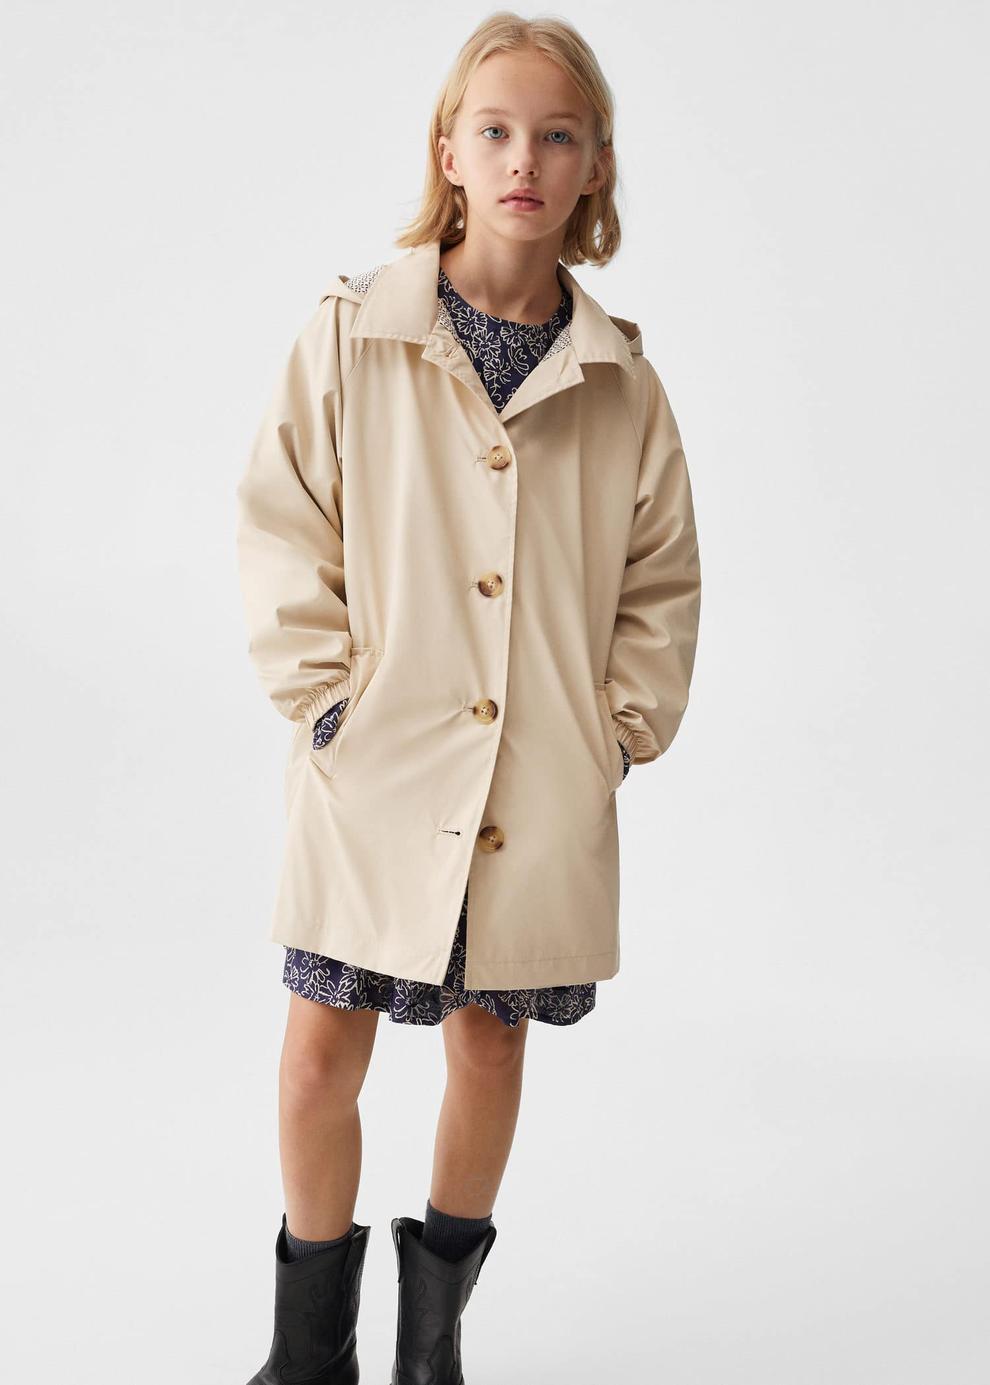 Hooded waterproof trench coat offers at S$ 69.9 in Mango Kids